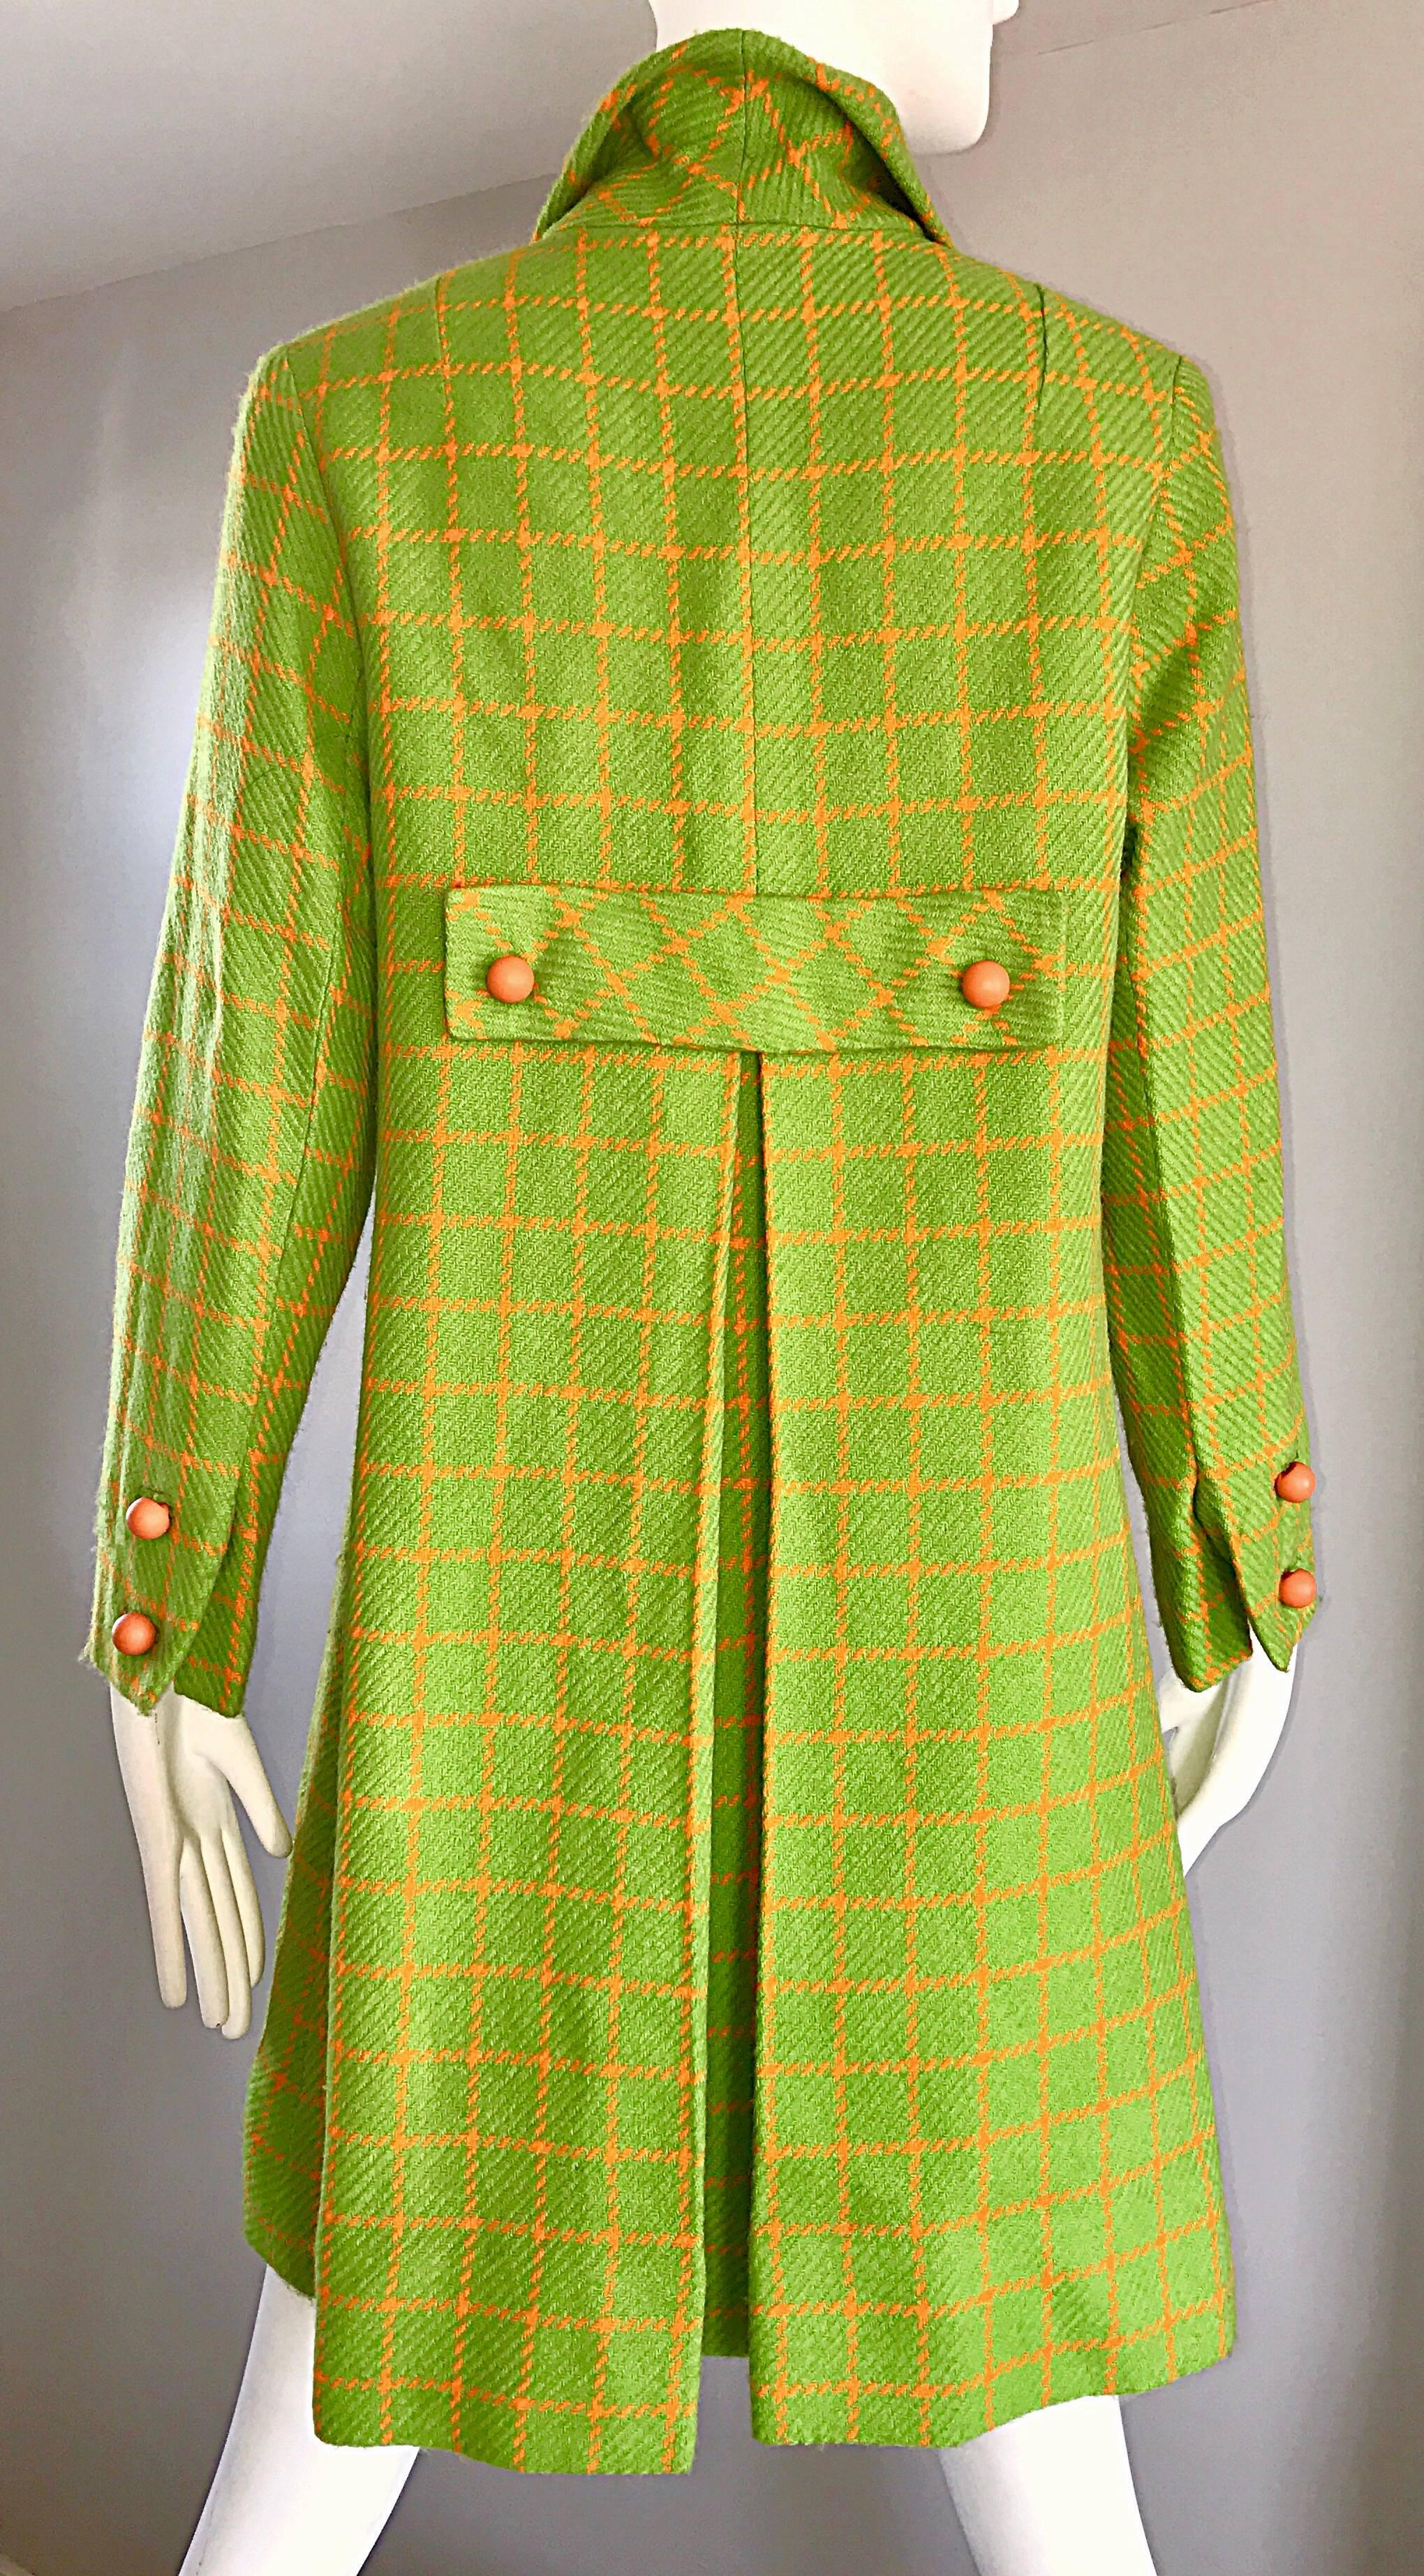 1960s Neon Lime Green and Orange Checkered Vintage 60s Wool Swing ...